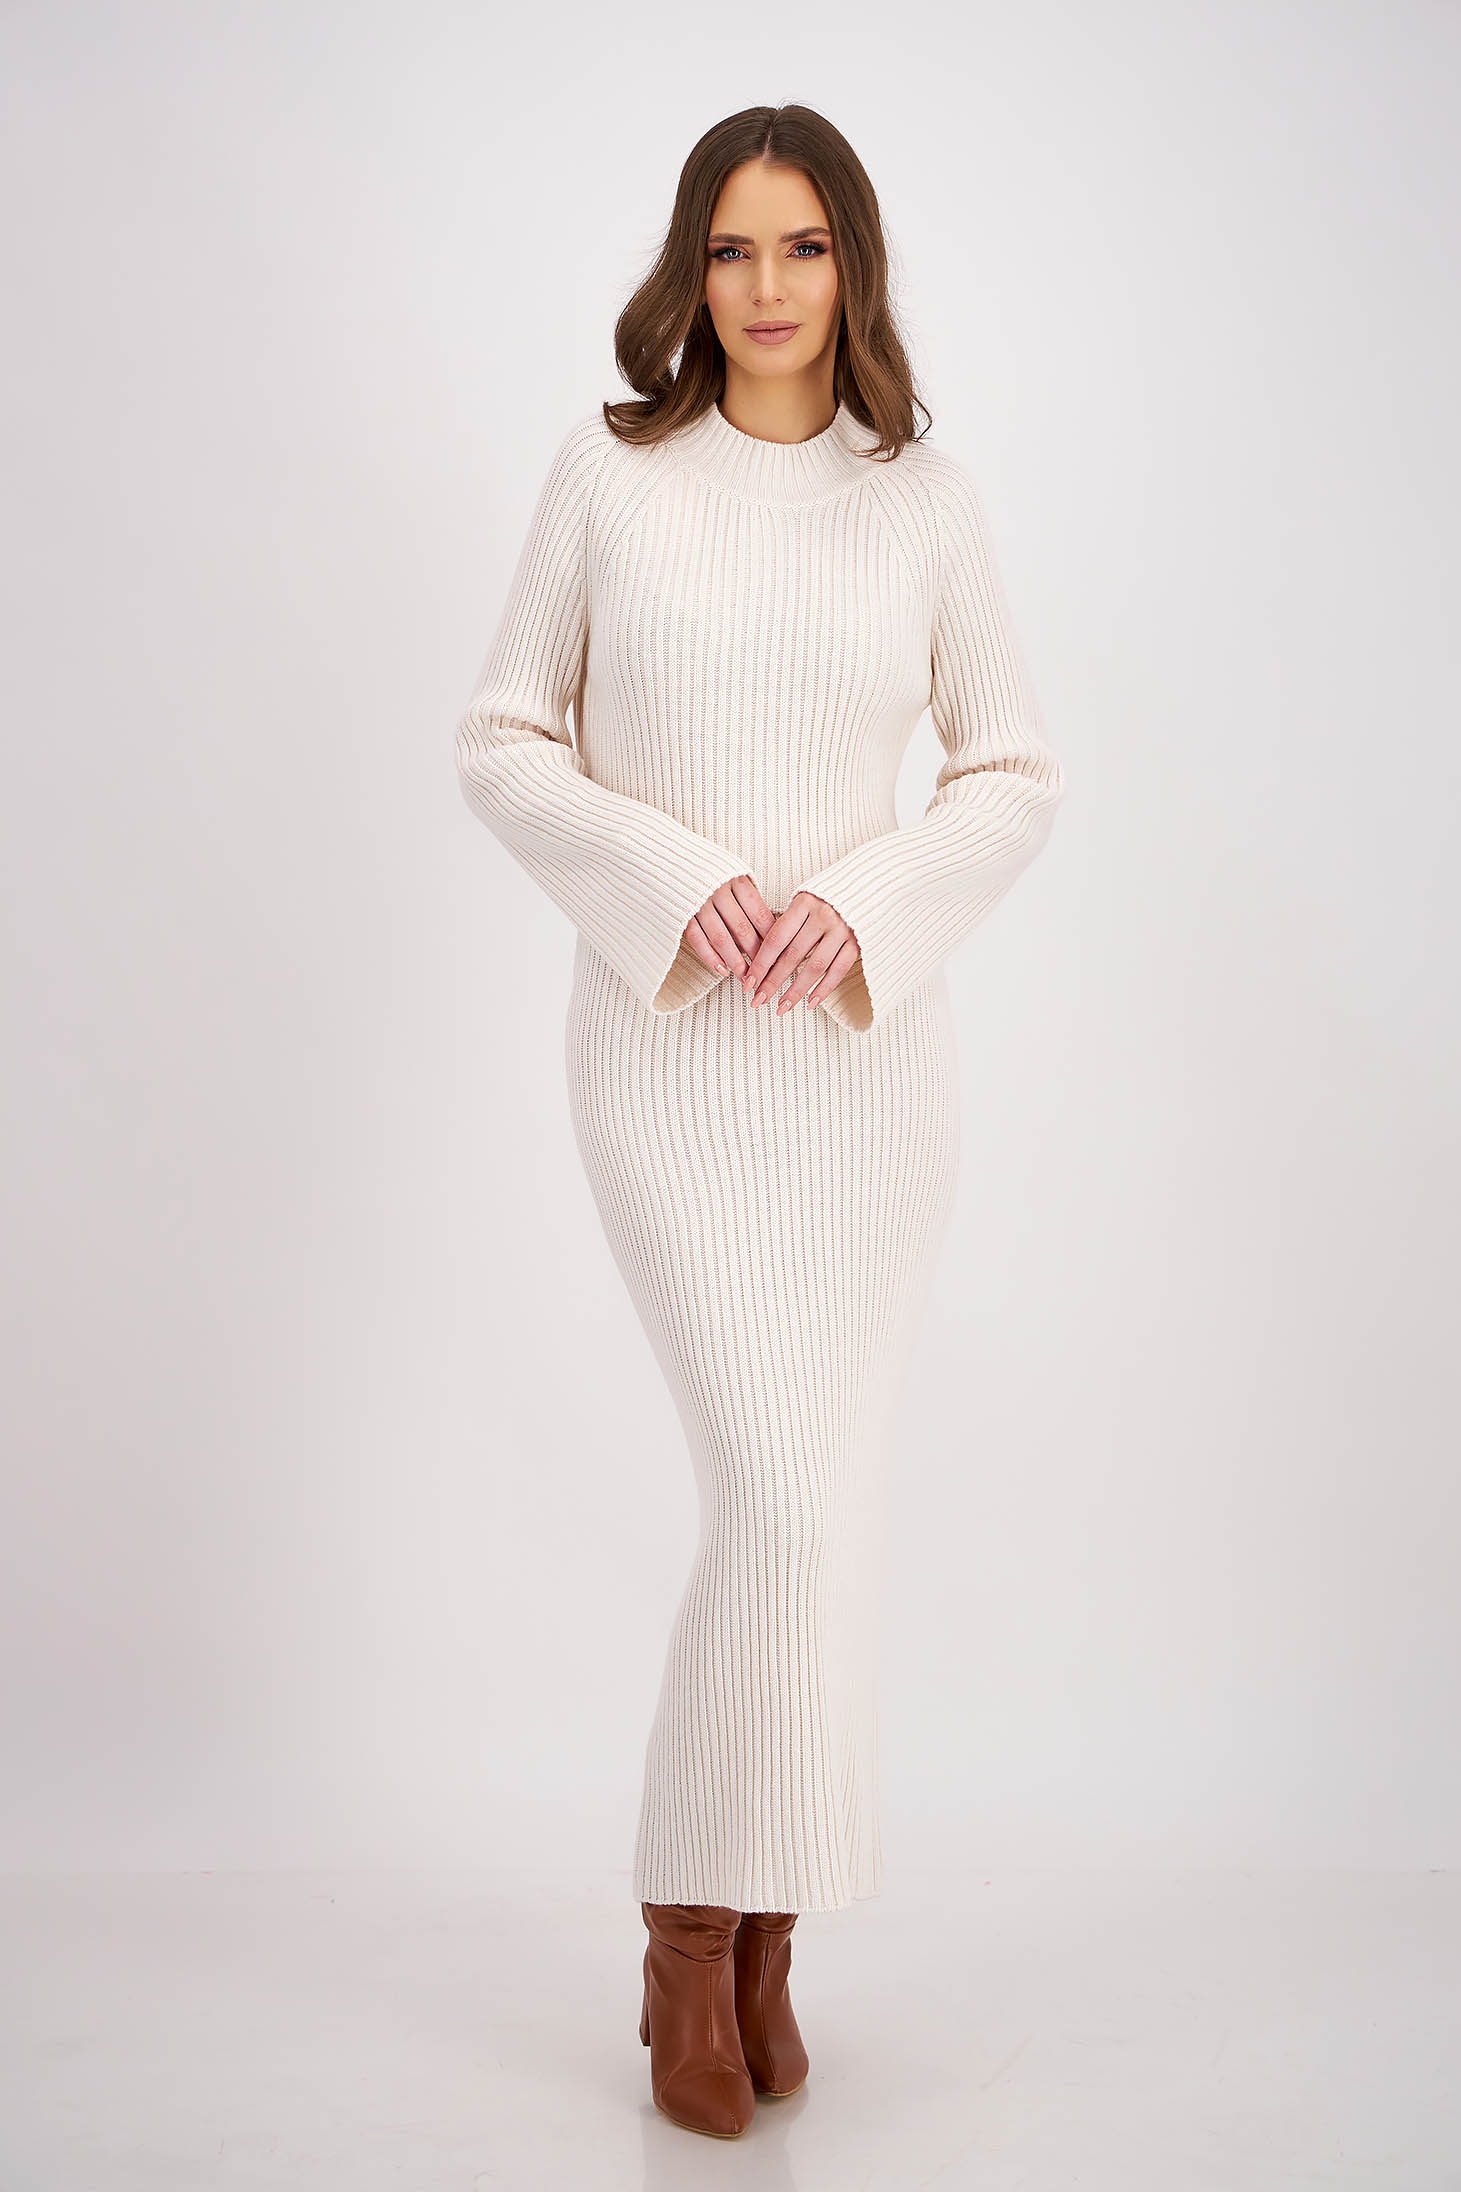 Ivory Knit Fitted Outfit - SunShine